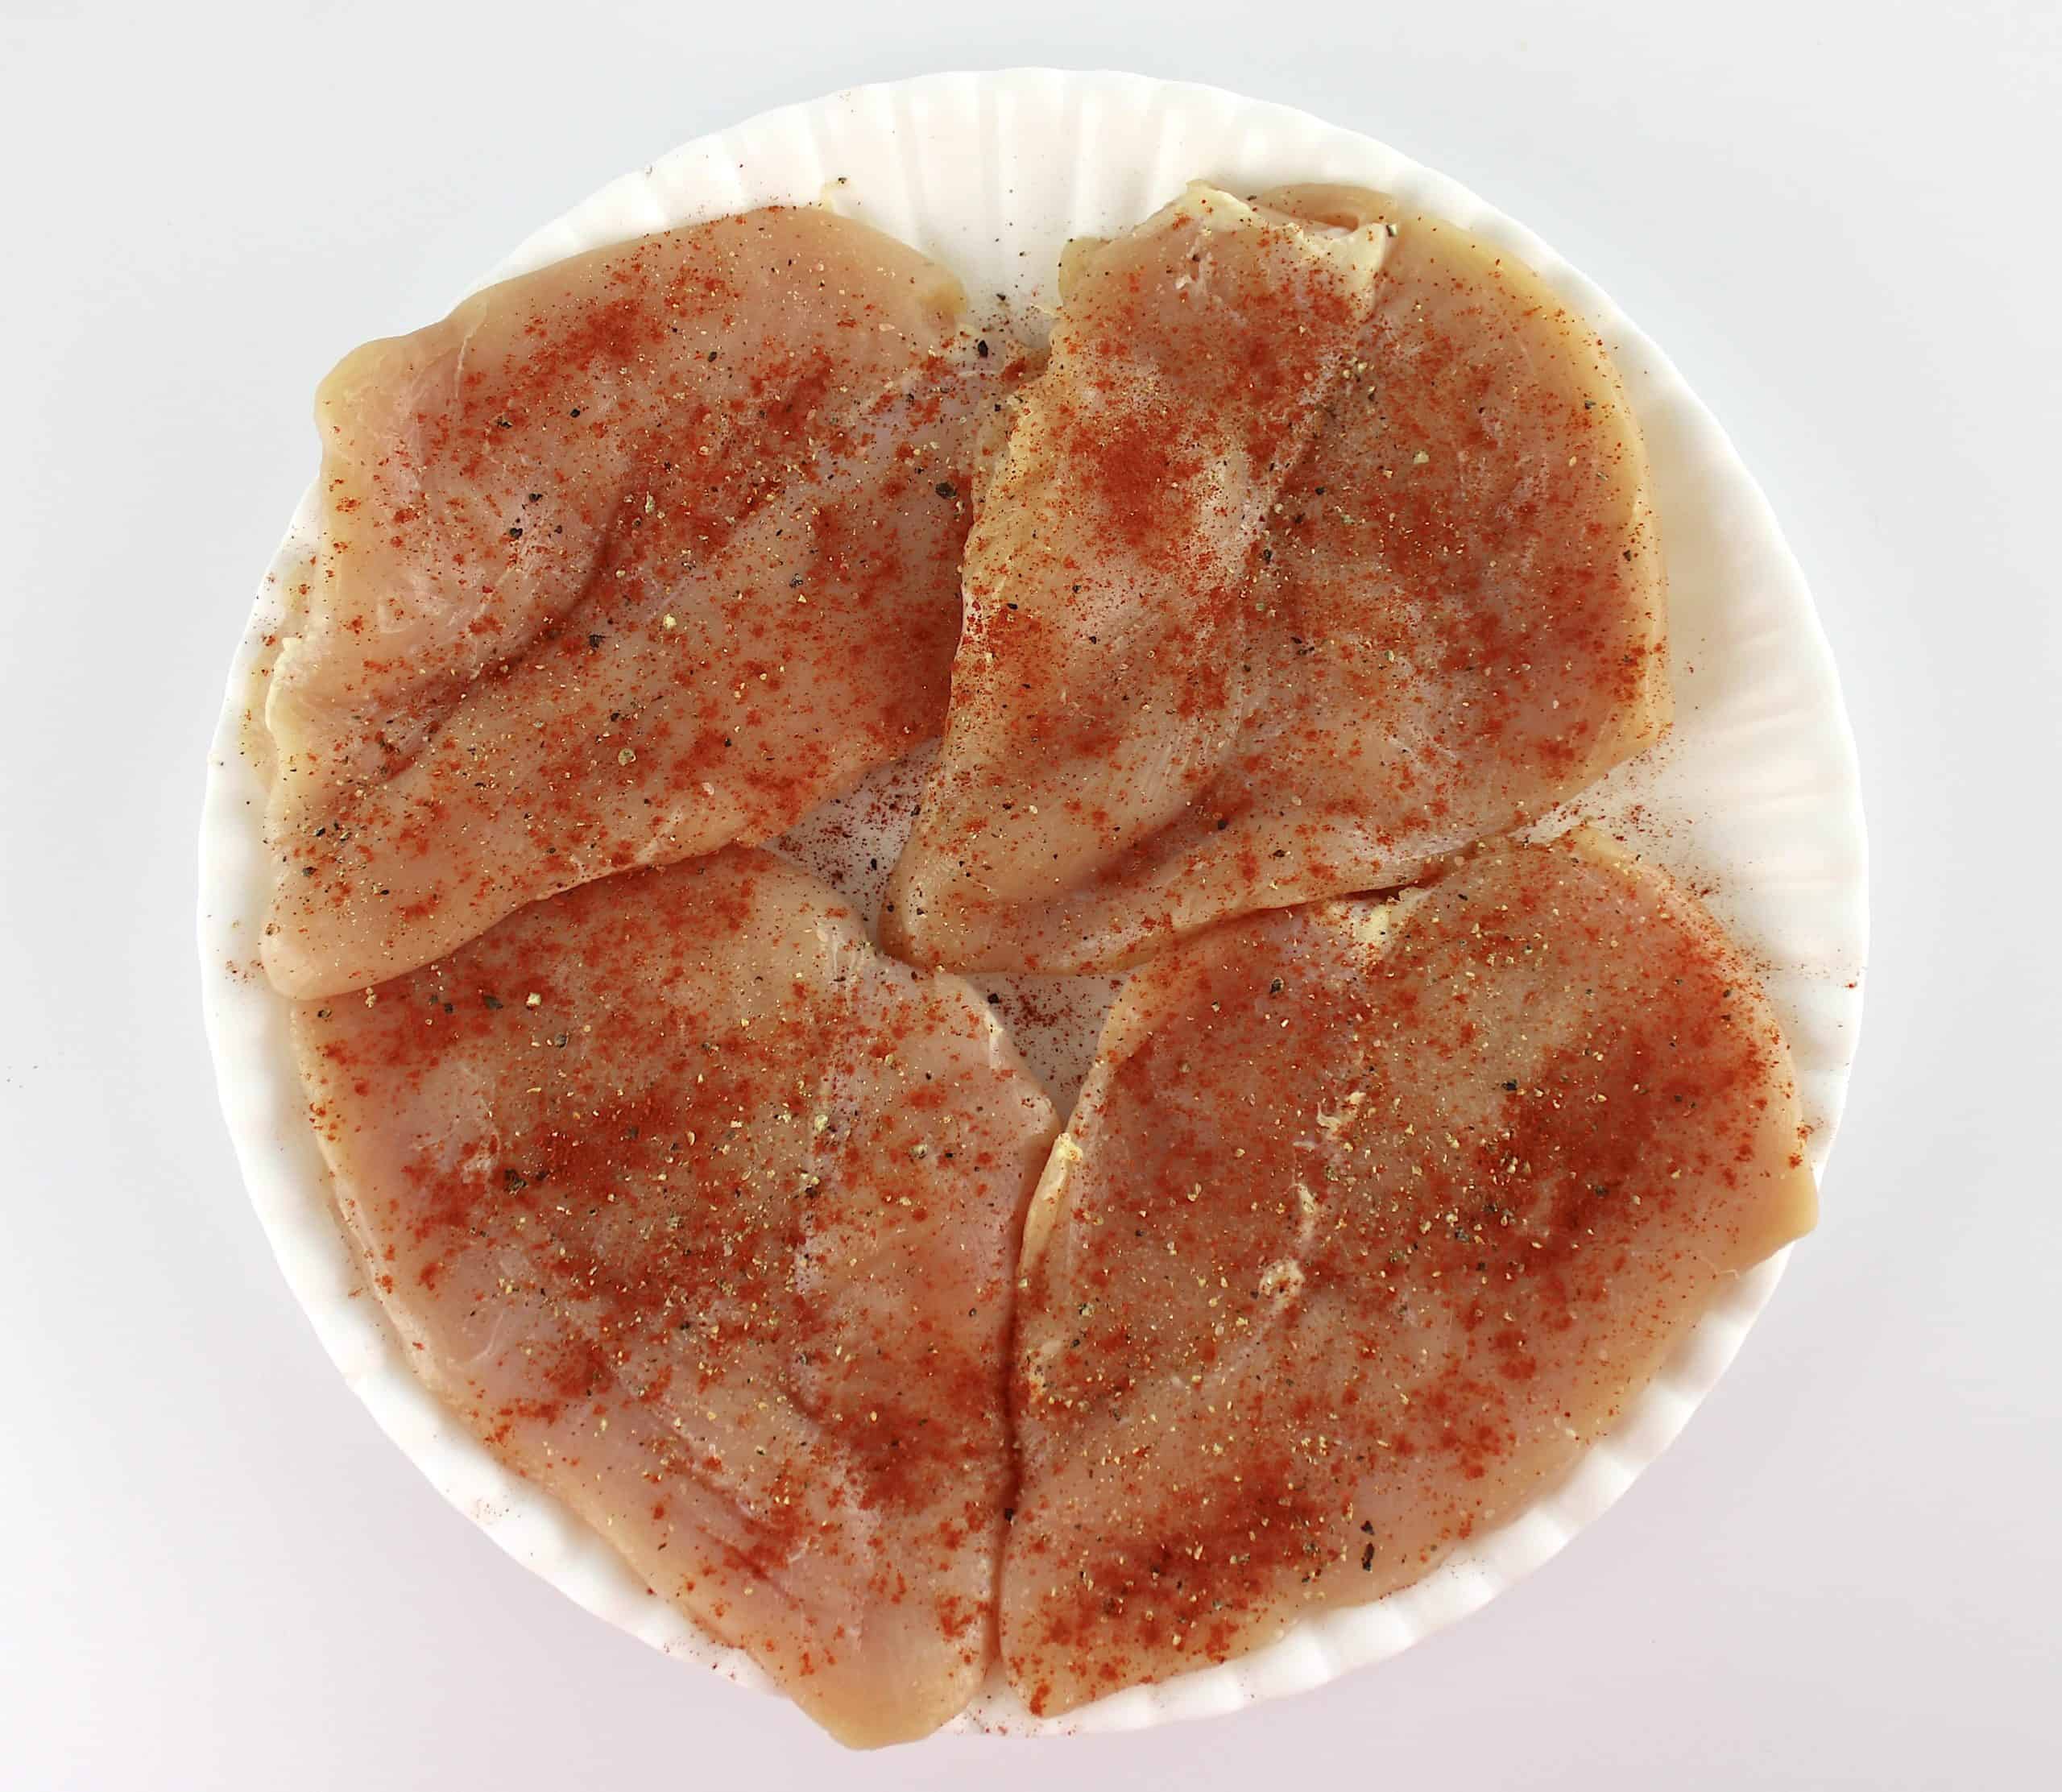 4 raw chicken breasts on white plate with salt pepper and smoked paprika